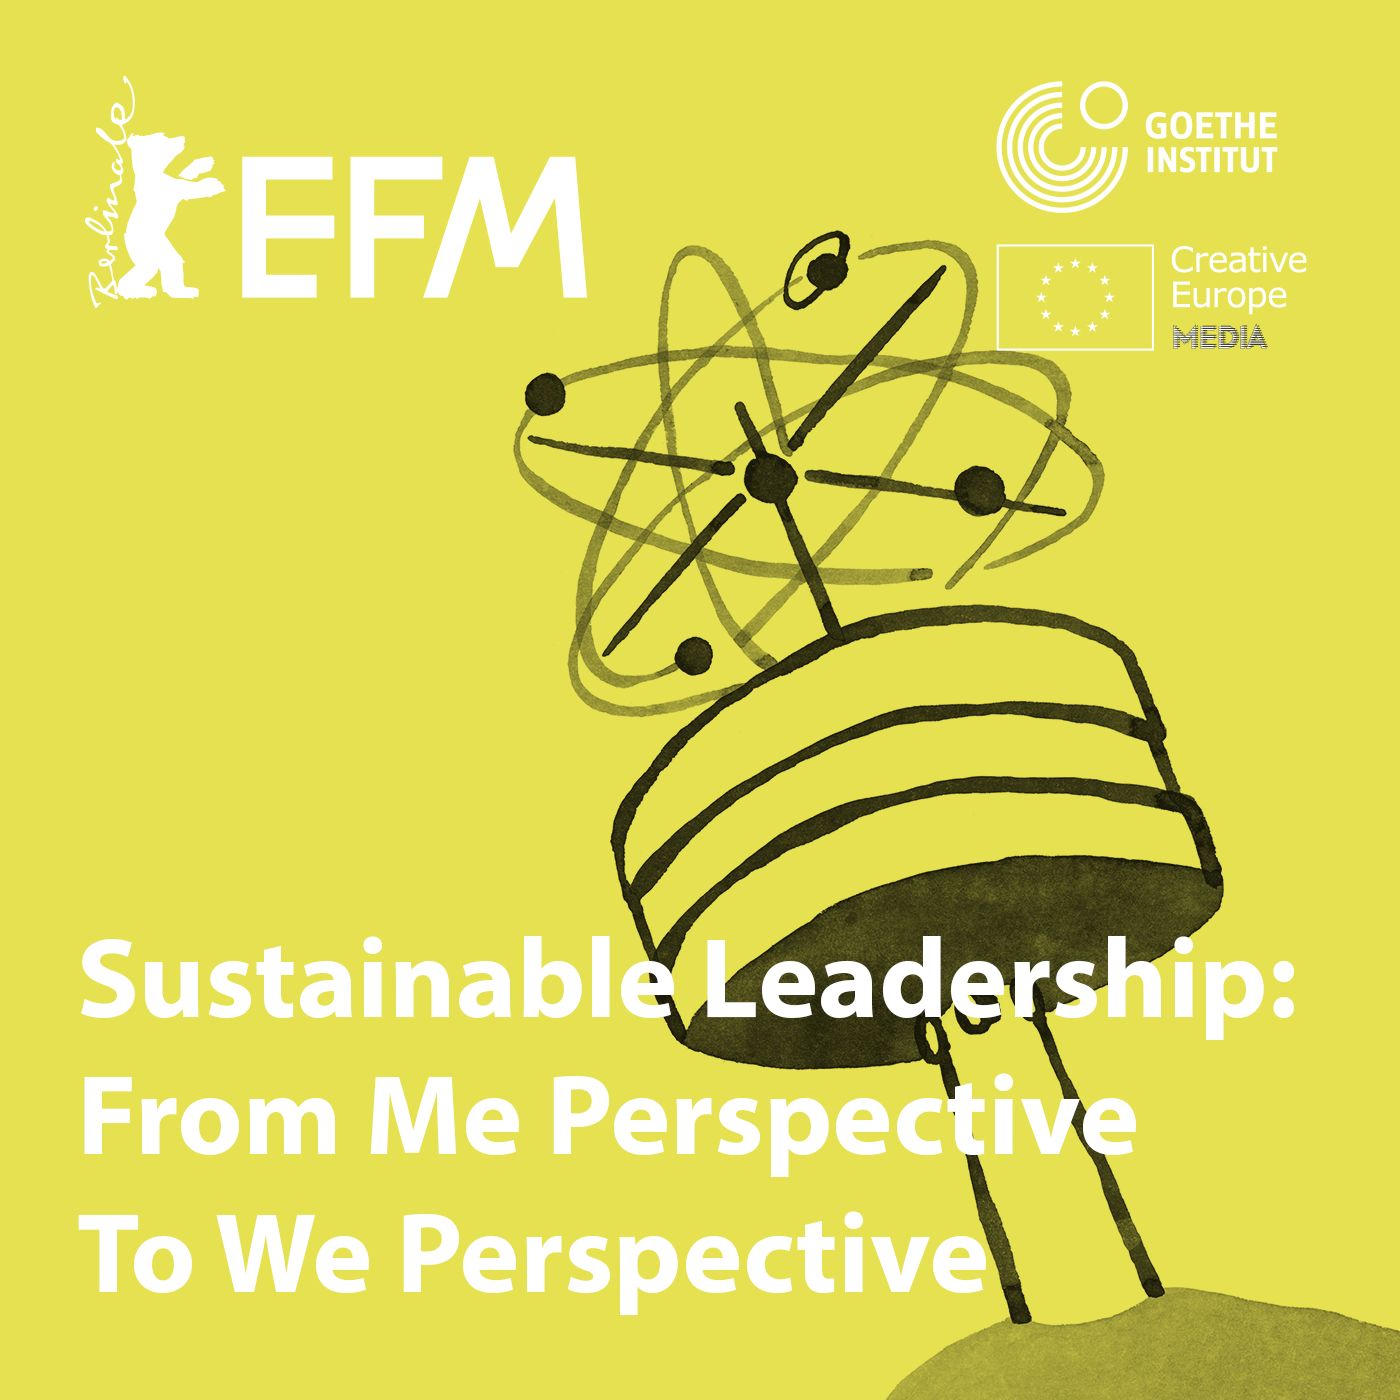 Sustainable Leadership: From Me Perspective To We Perspective